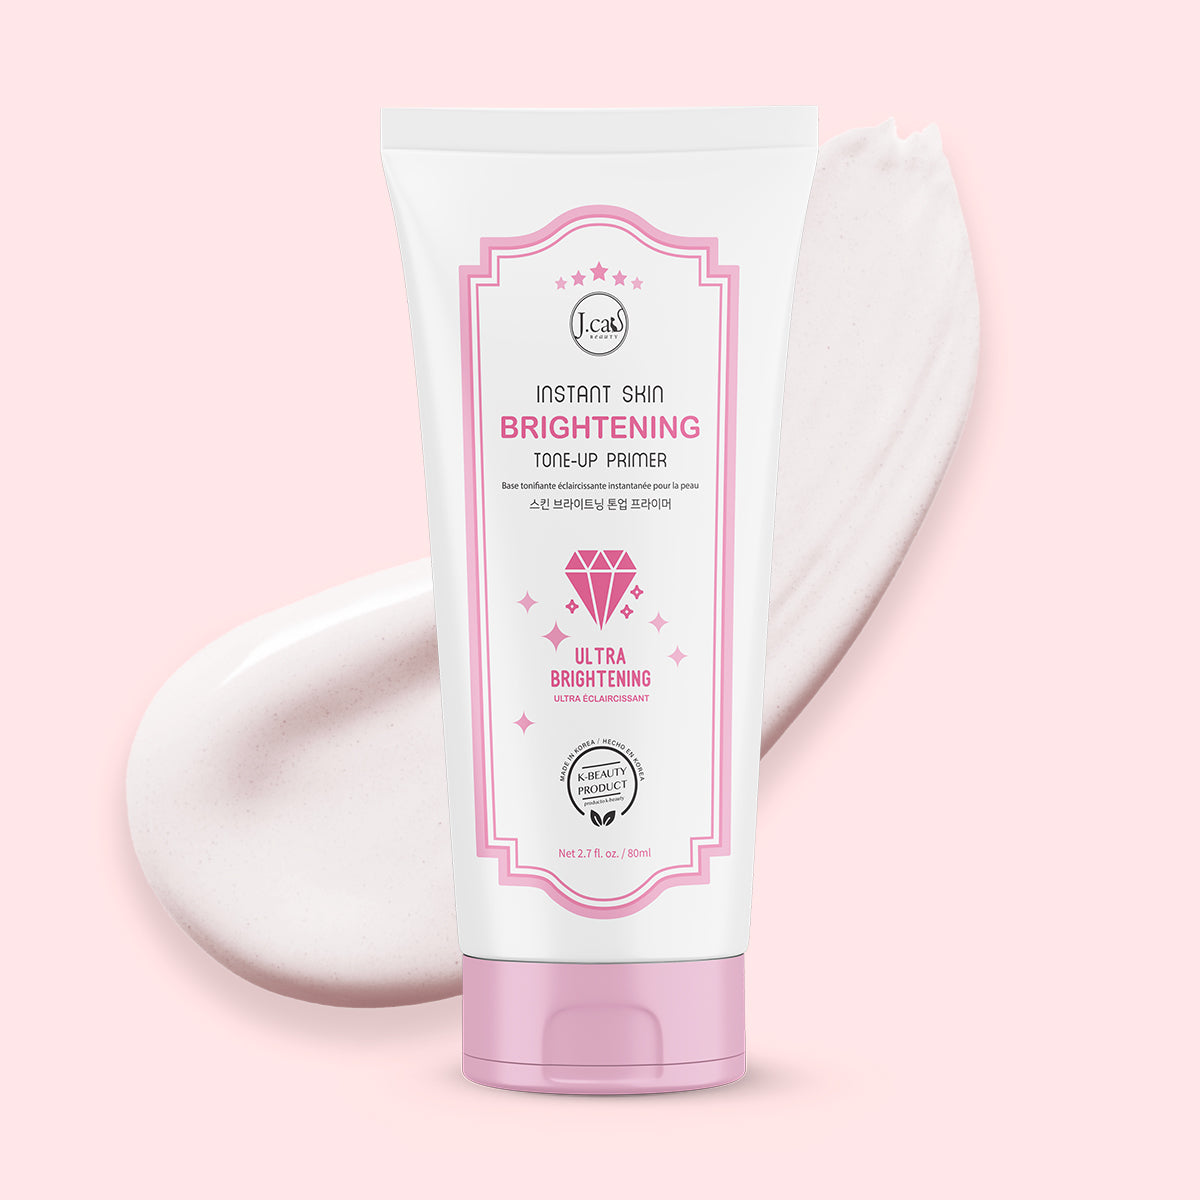 NEW IN SKINCARE: Fresh - Devoted To Pink